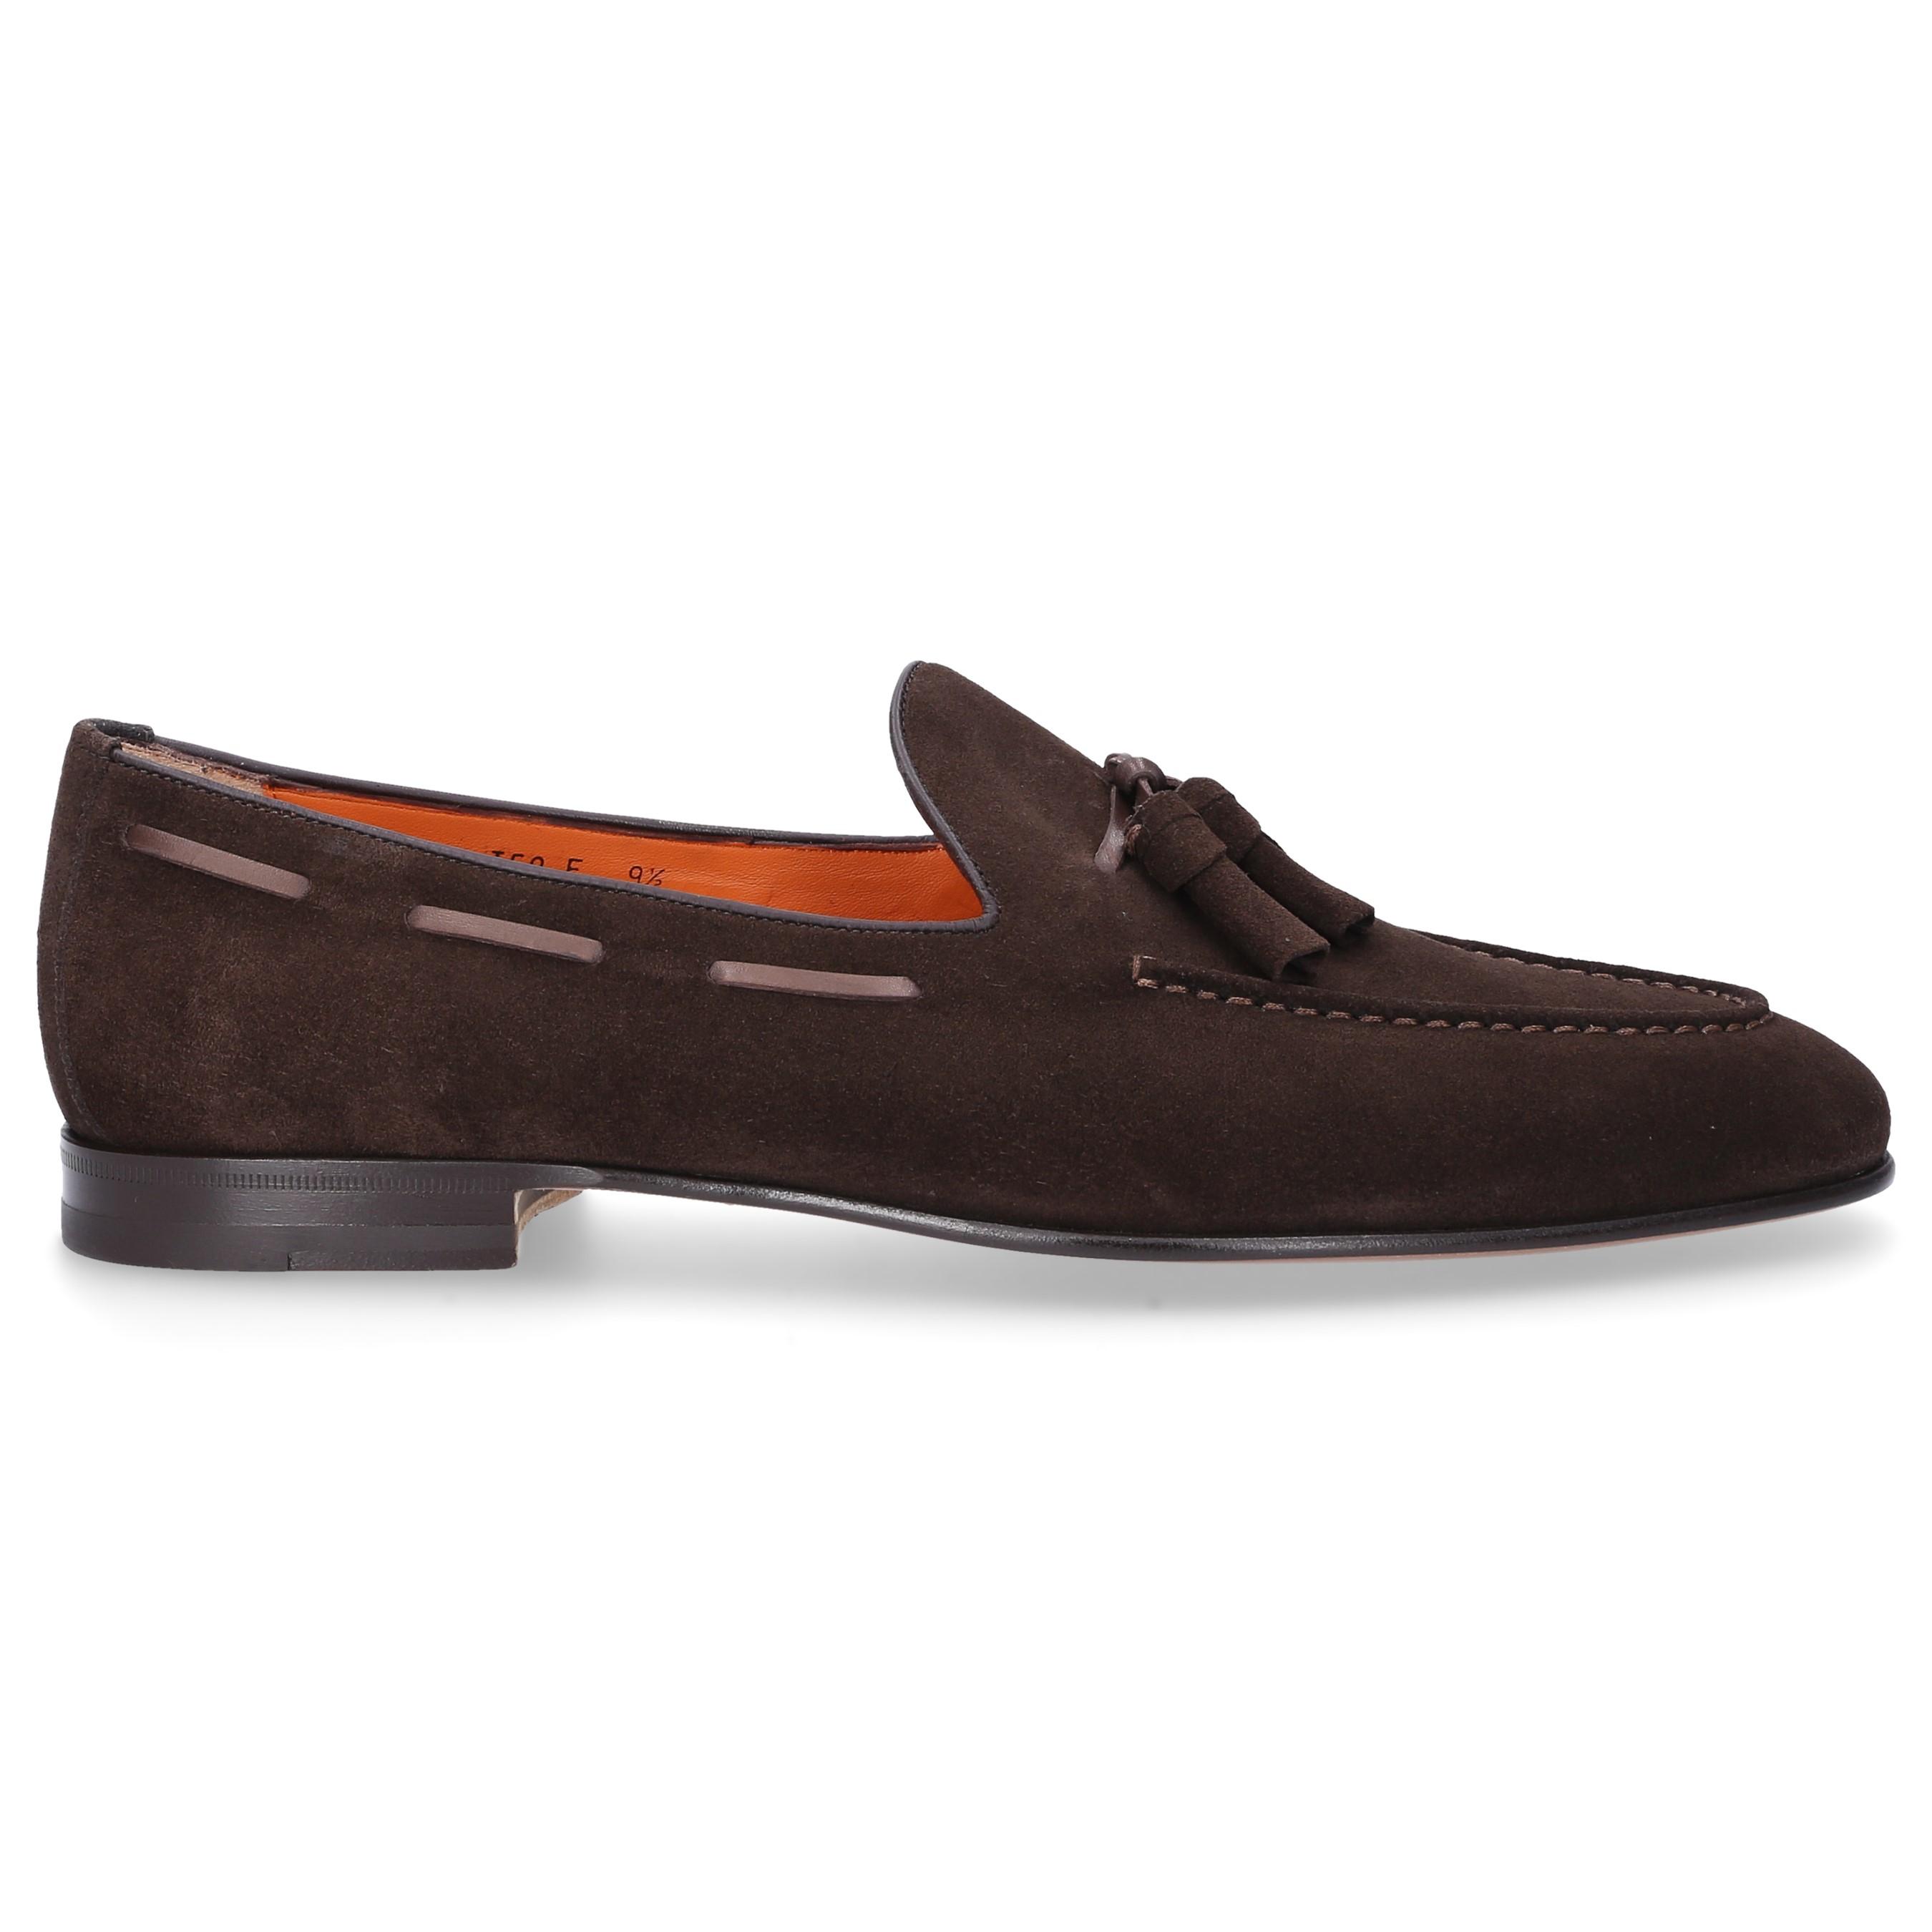 Santoni Loafers 13904 Calf-suede Stitching Tassel Brown for Men - Lyst